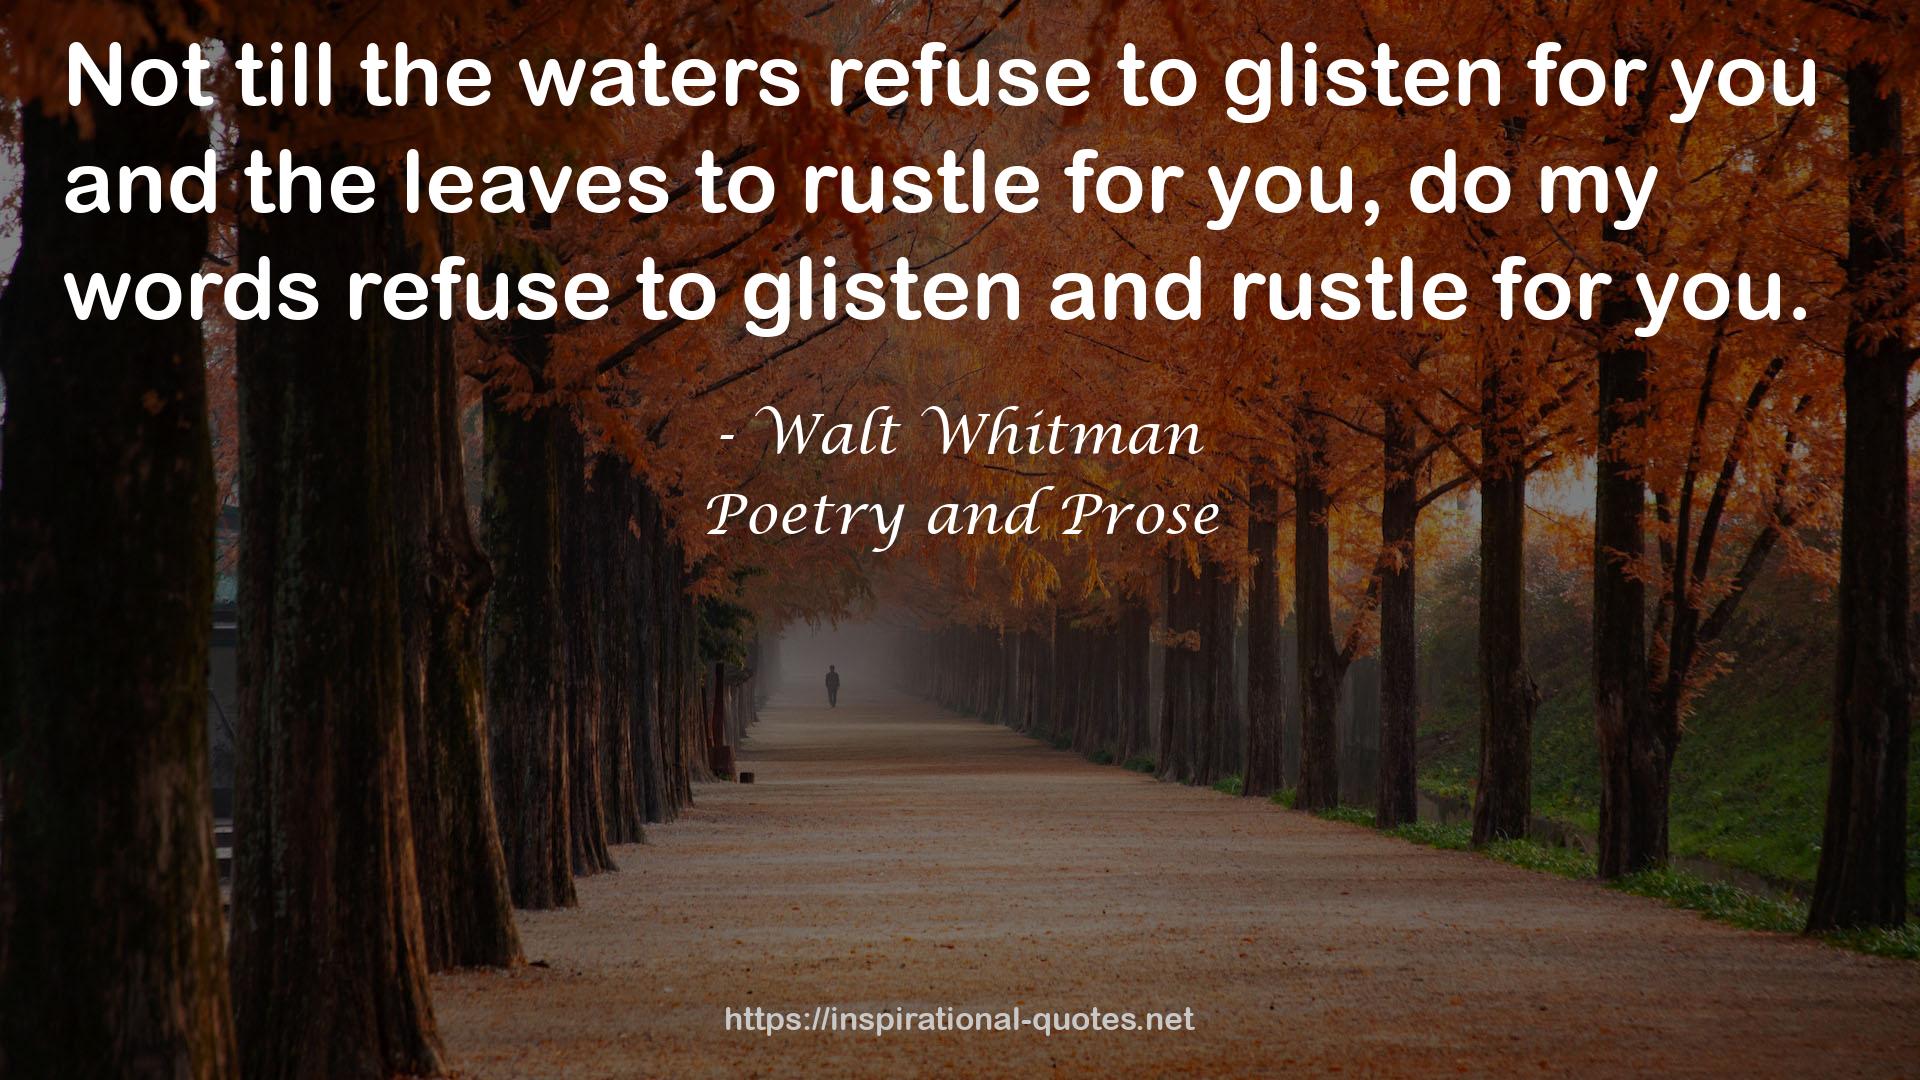 Poetry and Prose QUOTES